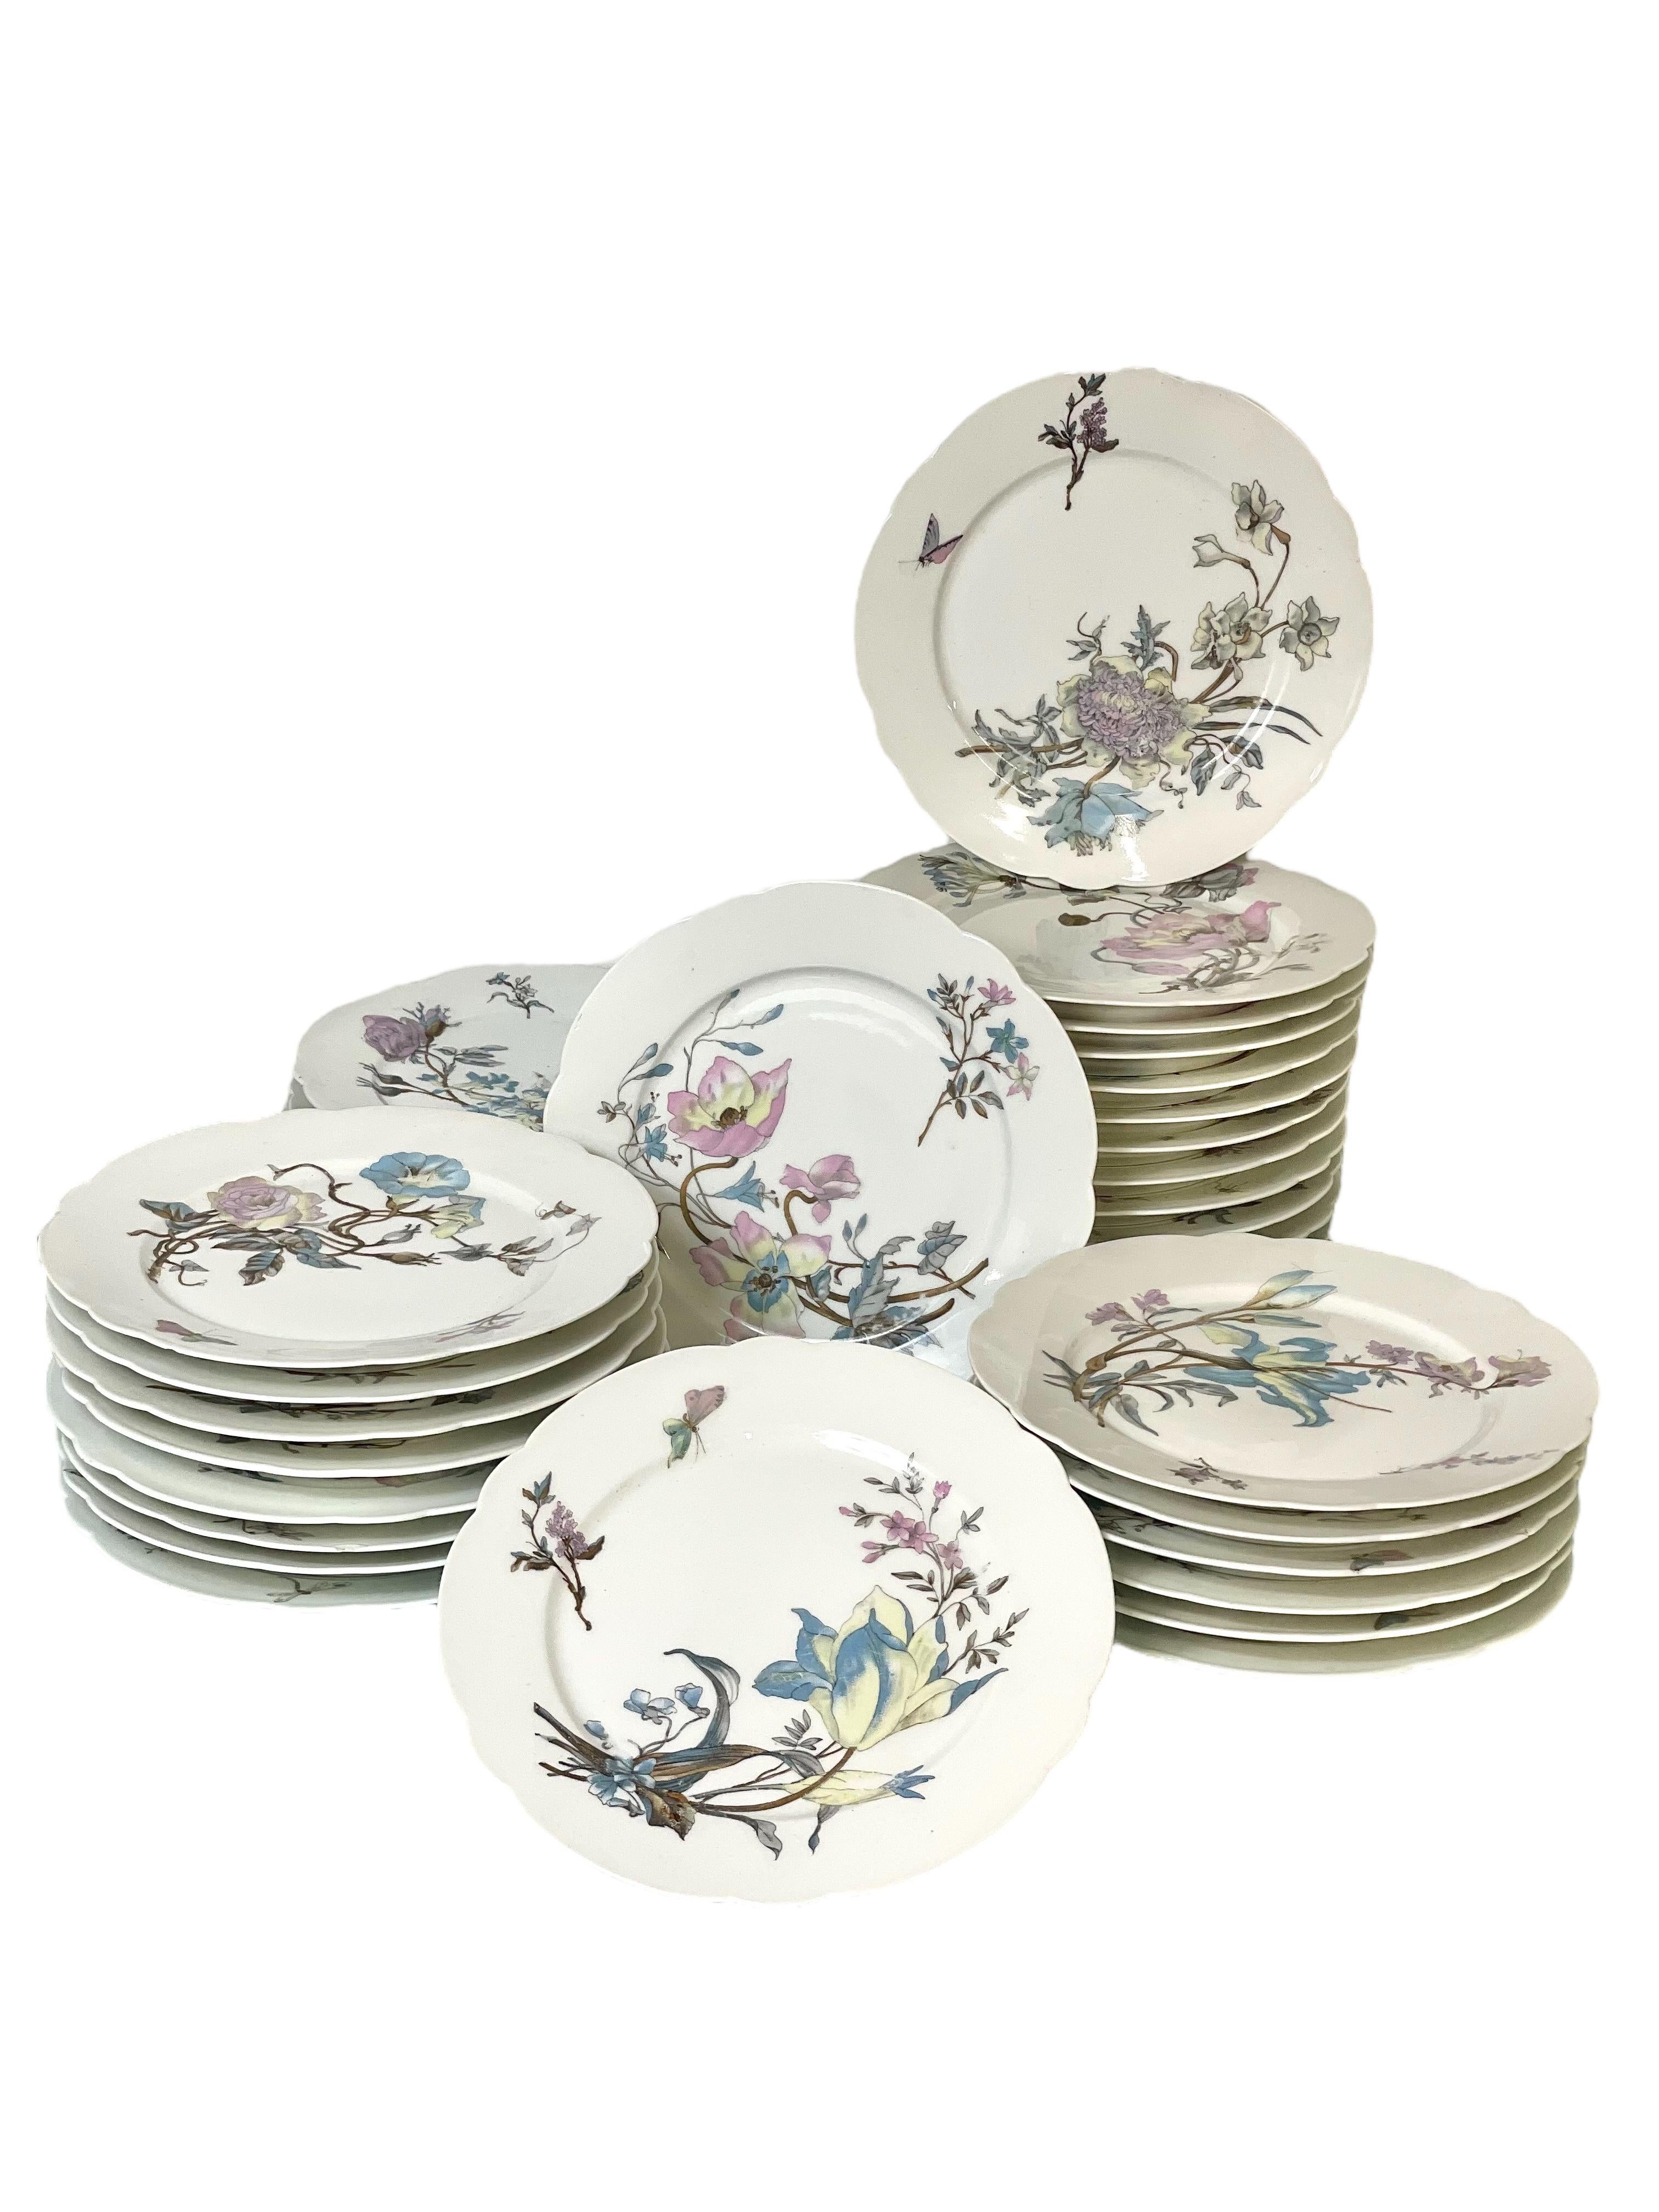 An extensive and exquisitely beautiful table service in white porcelain, possibly Limoges, dating from the 19th century. Each item in the set is hand-painted with wonderfully detailed butterflies and sprays of wild flowers, while the rim of almost